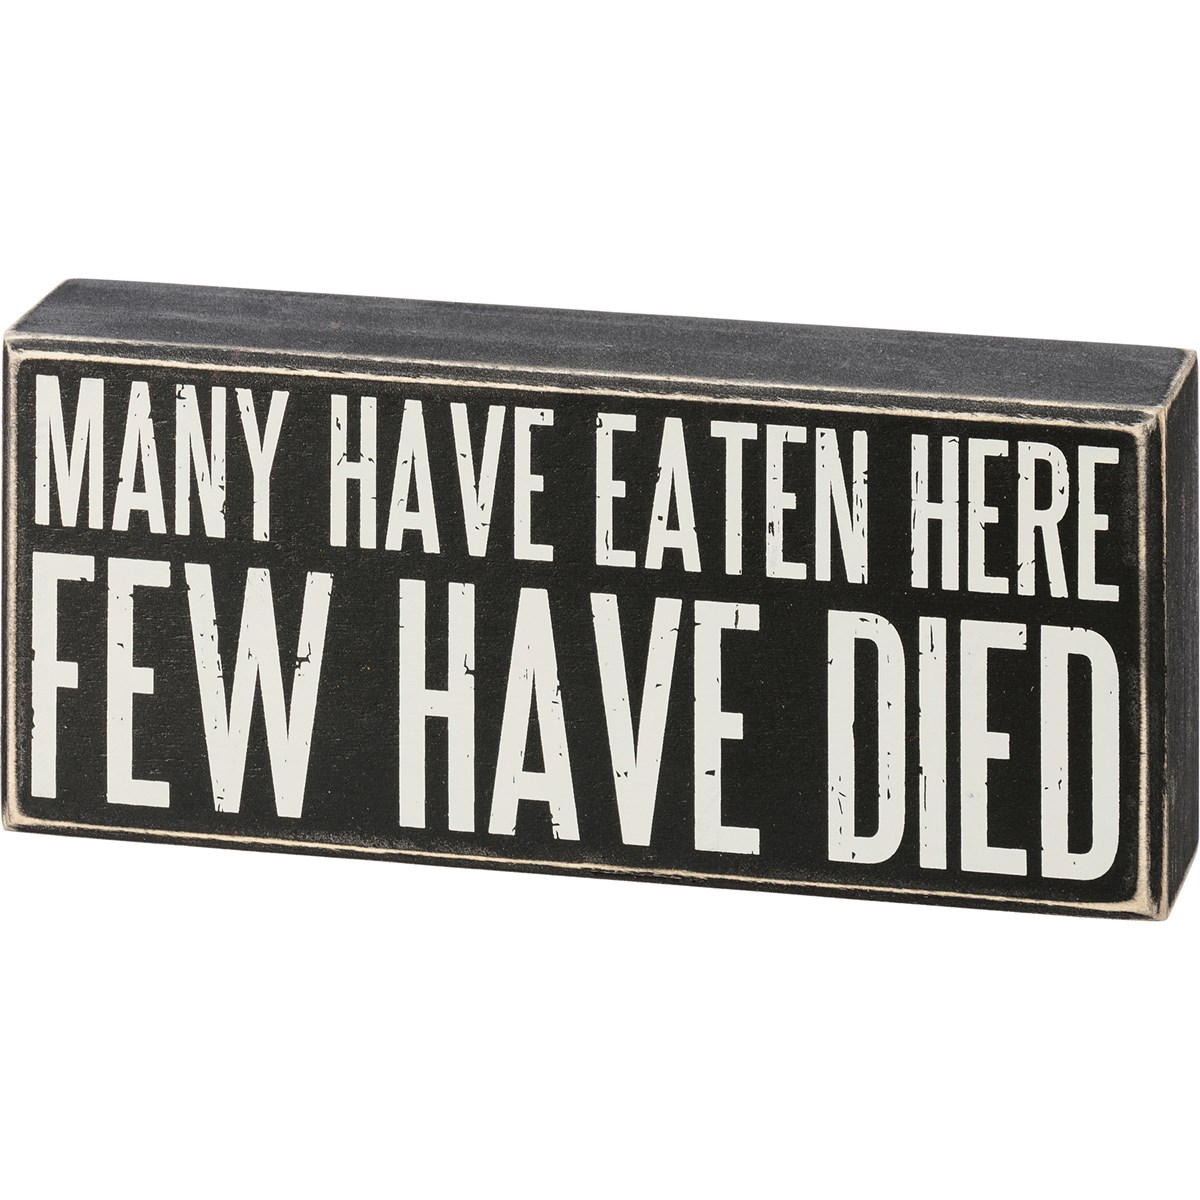 Many Have Eaten Here Few Have Died Box Sign - Wood